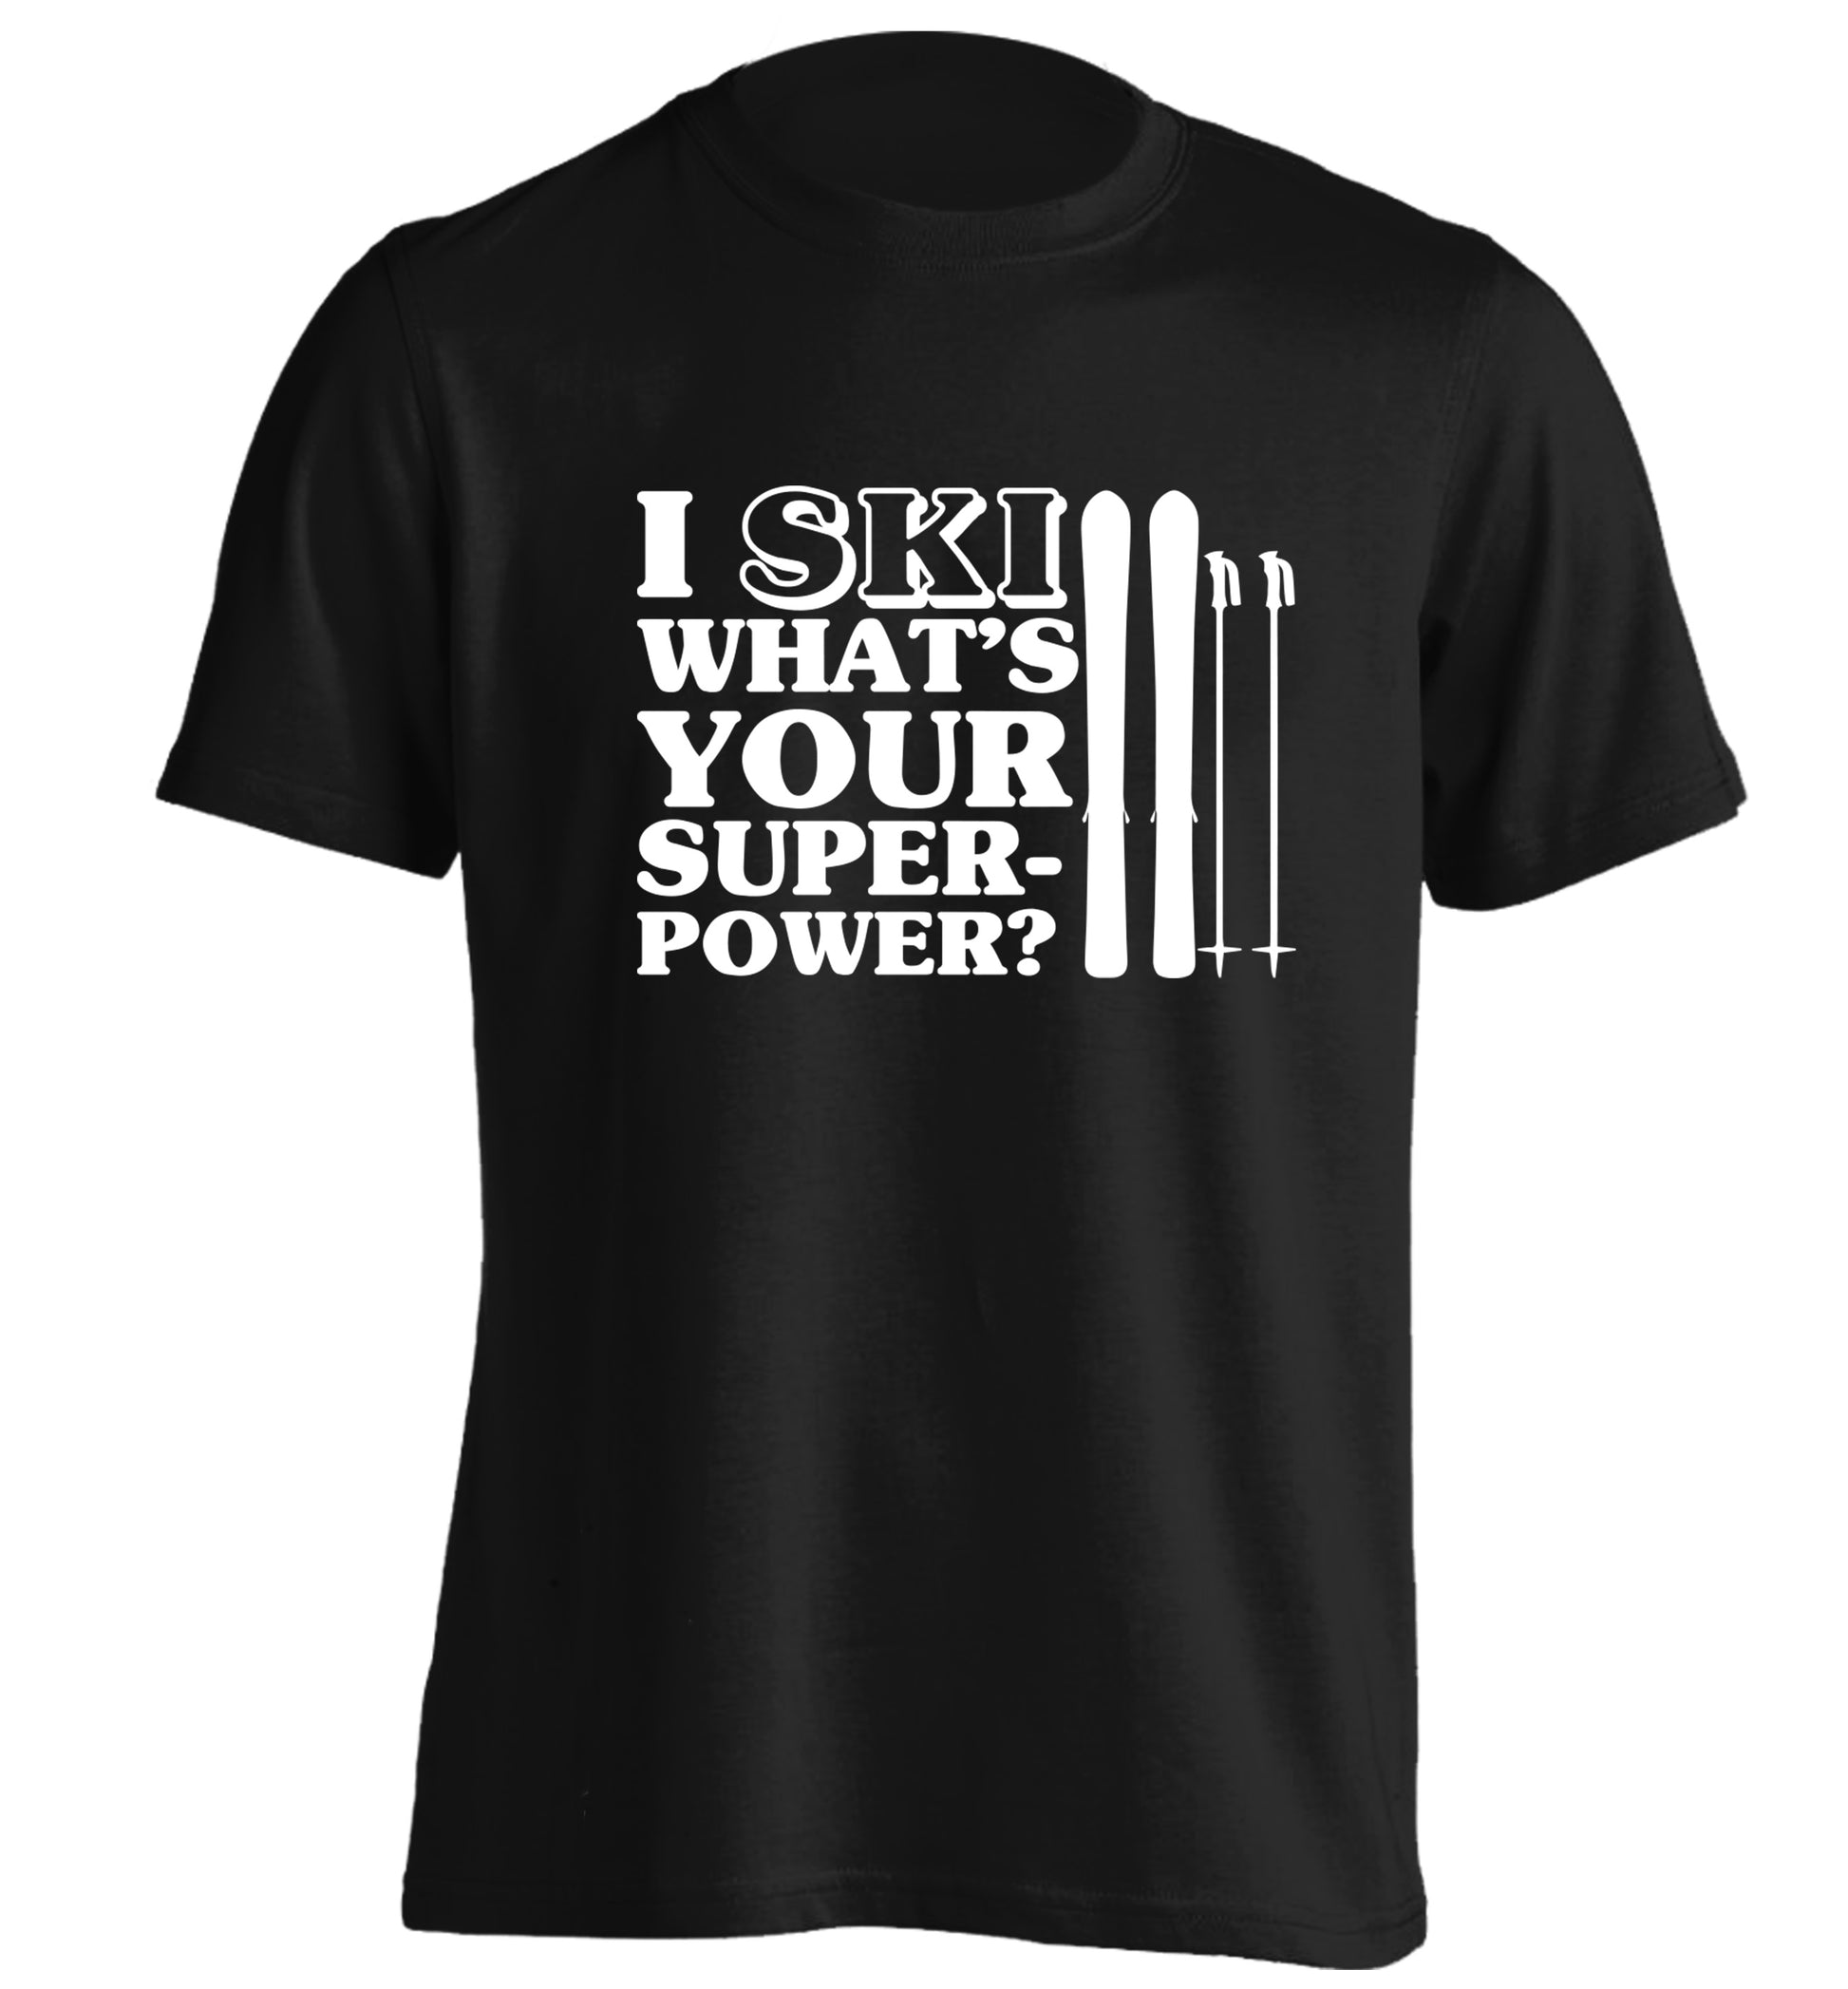 I ski what's your superpower? adults unisexblack Tshirt 2XL